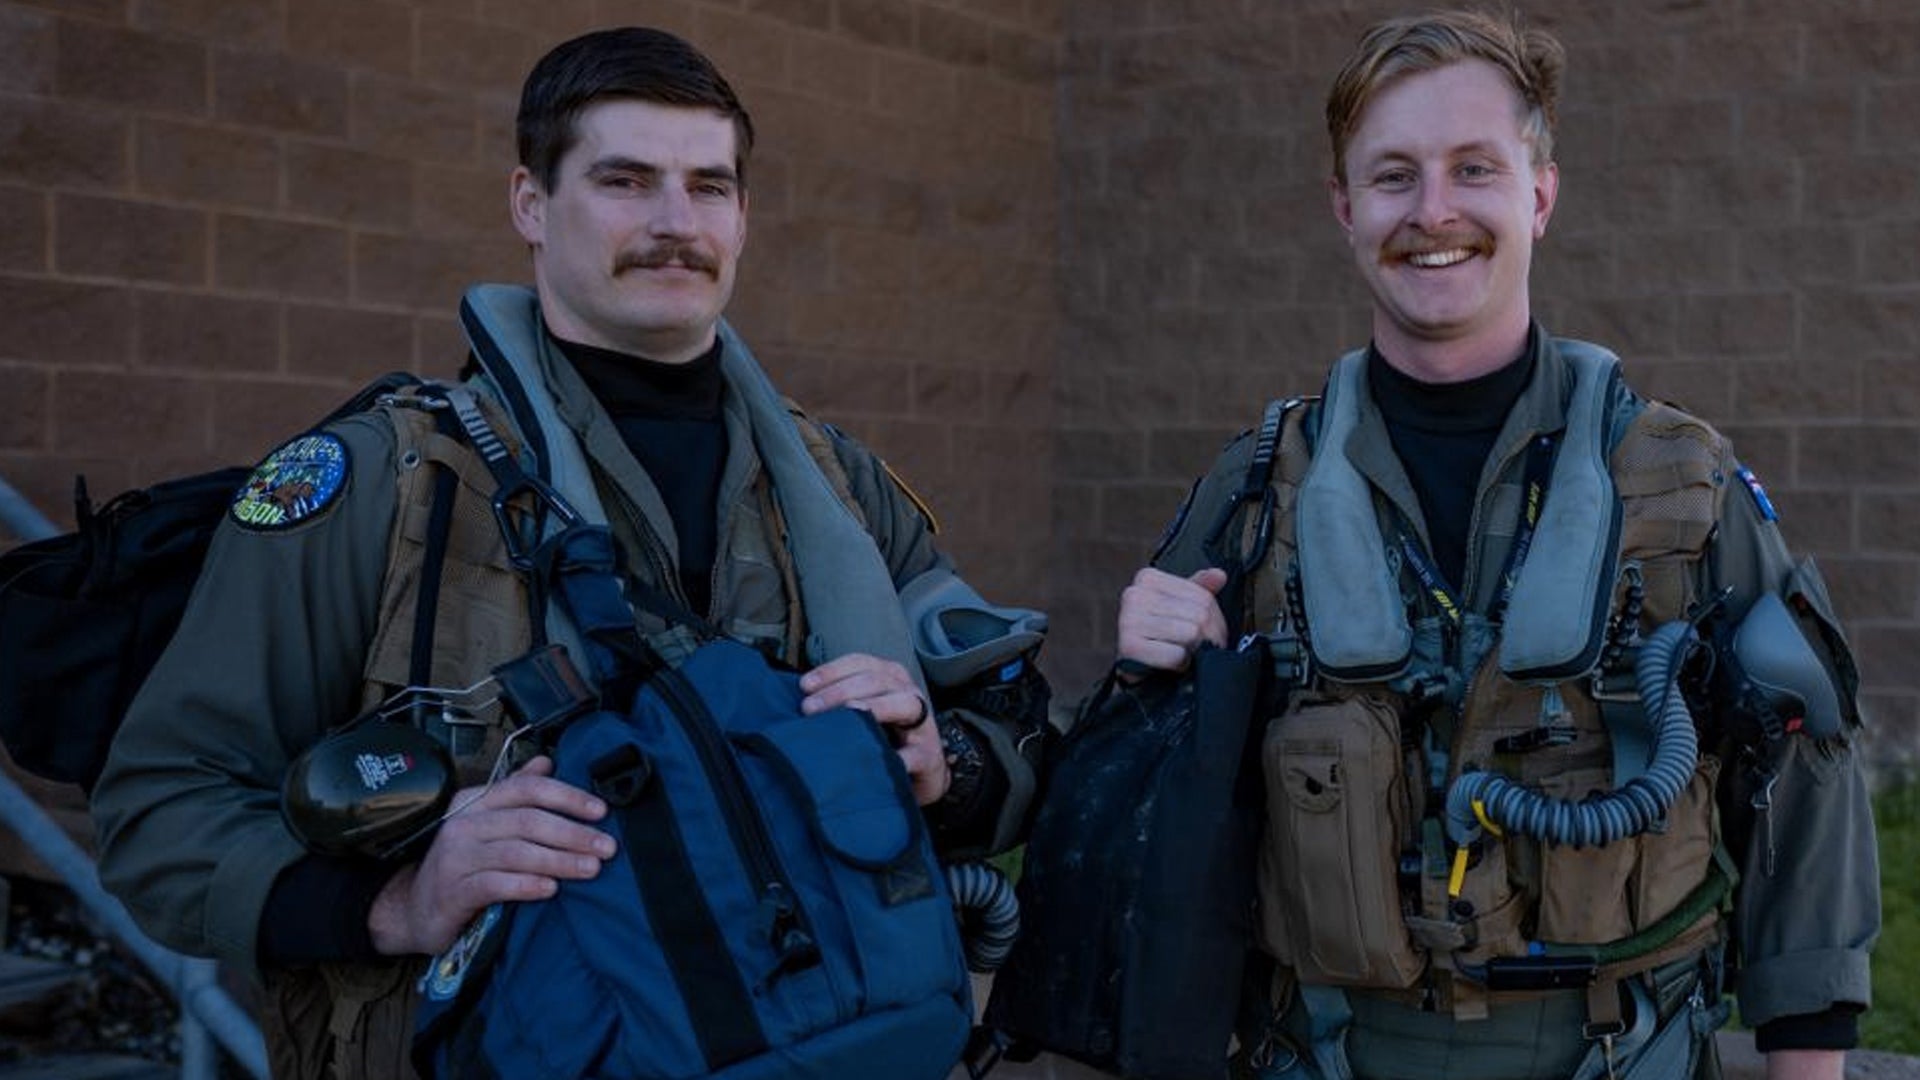 The Air Force published an entire photo album of mustachioed troops and it’s glorious